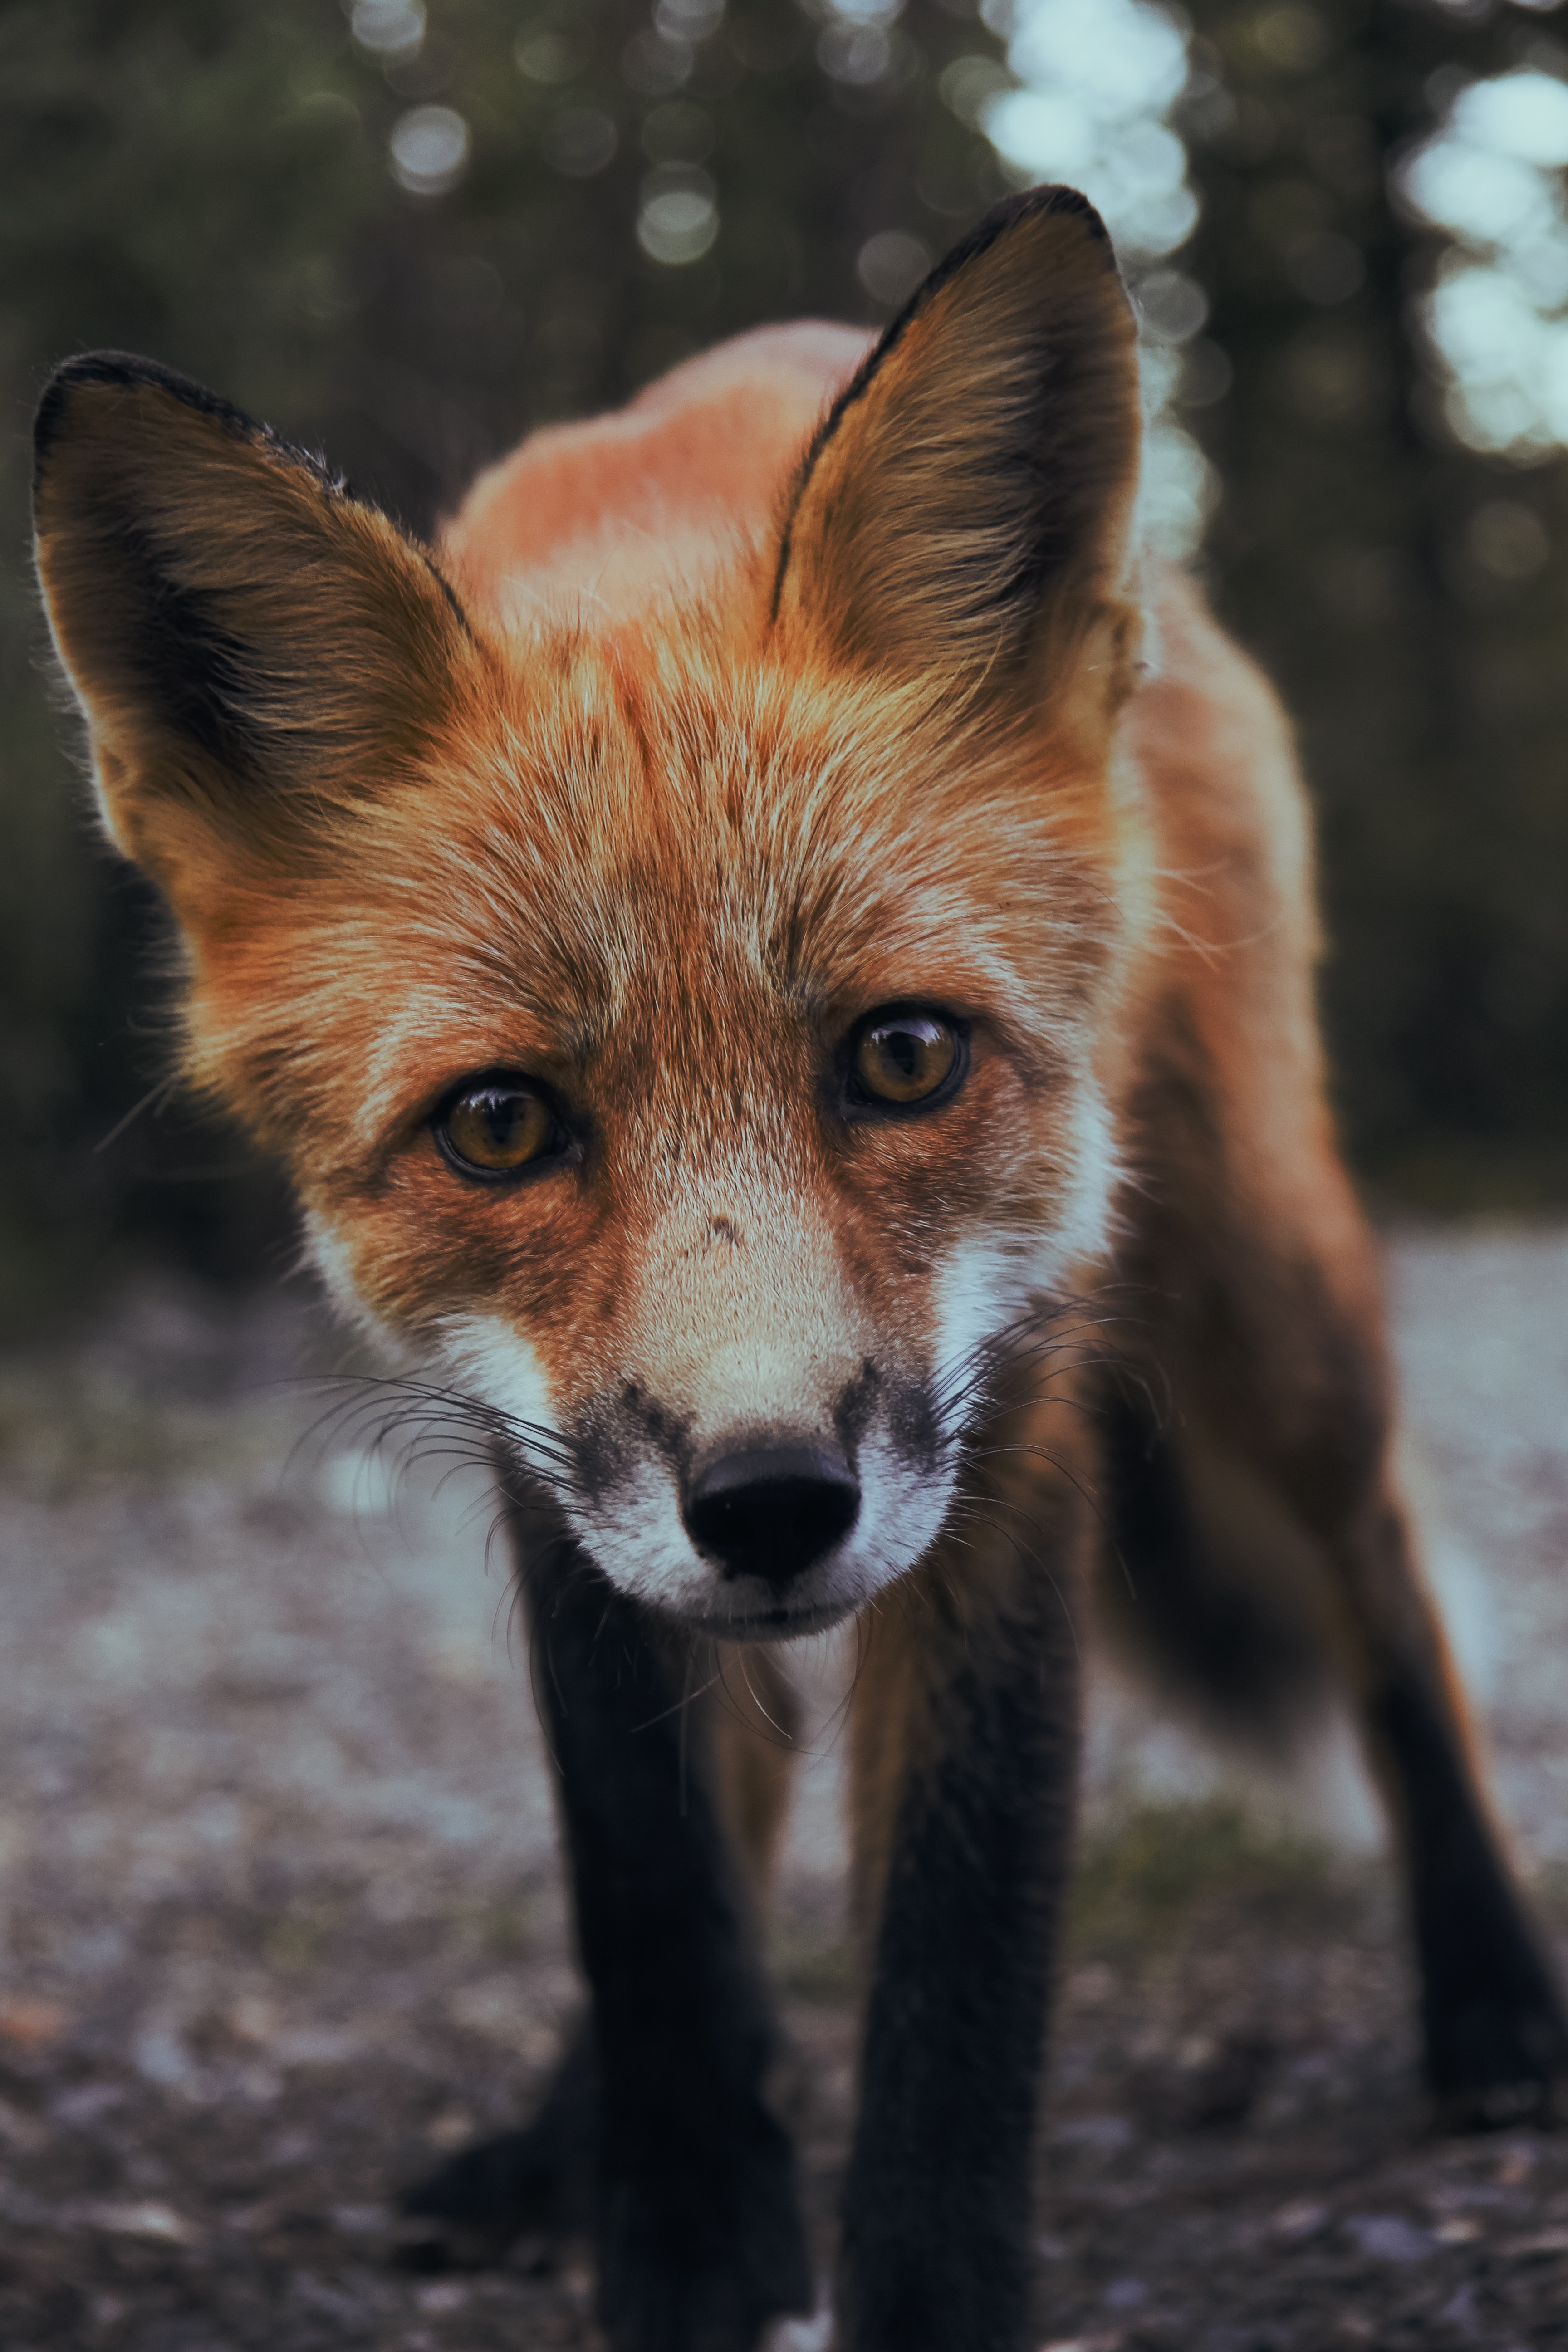 128051 download wallpaper fox, animals, young, muzzle, predator, sight, opinion, joey screensavers and pictures for free